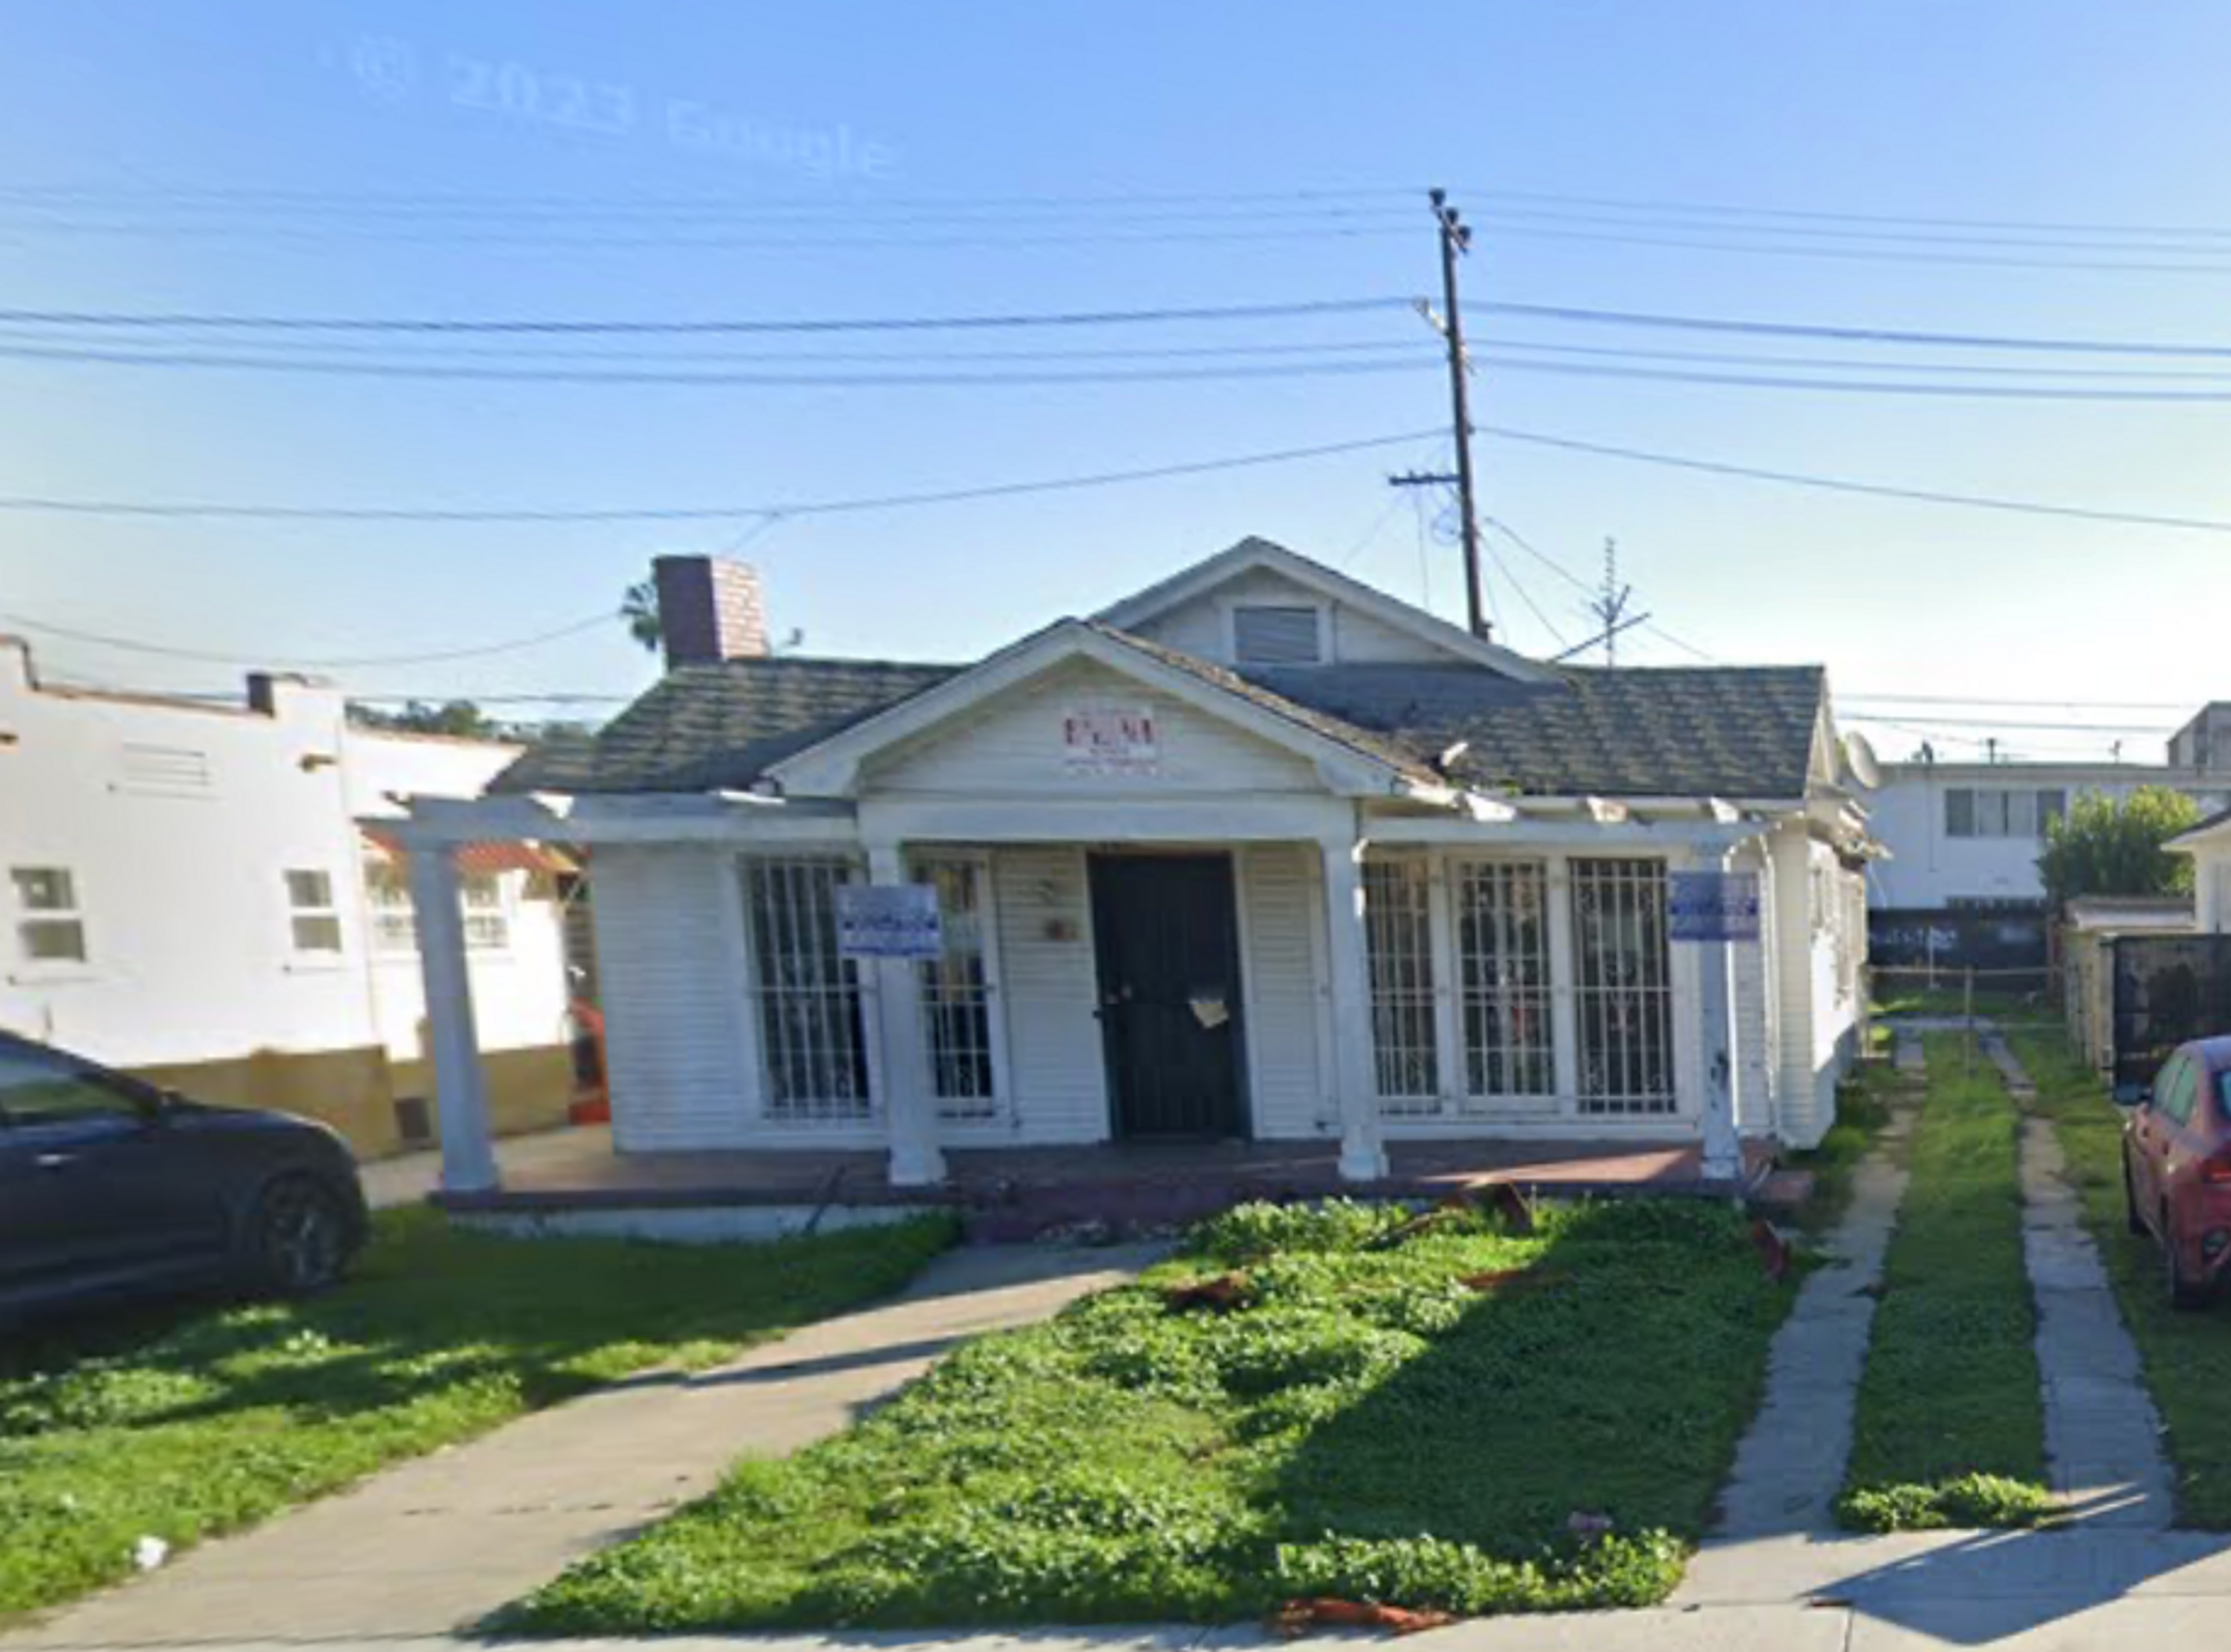 Google Street View screenshot of 5510 S. Manhattan Place, a white bungalow with a gray roof, red porch, and green lawn.